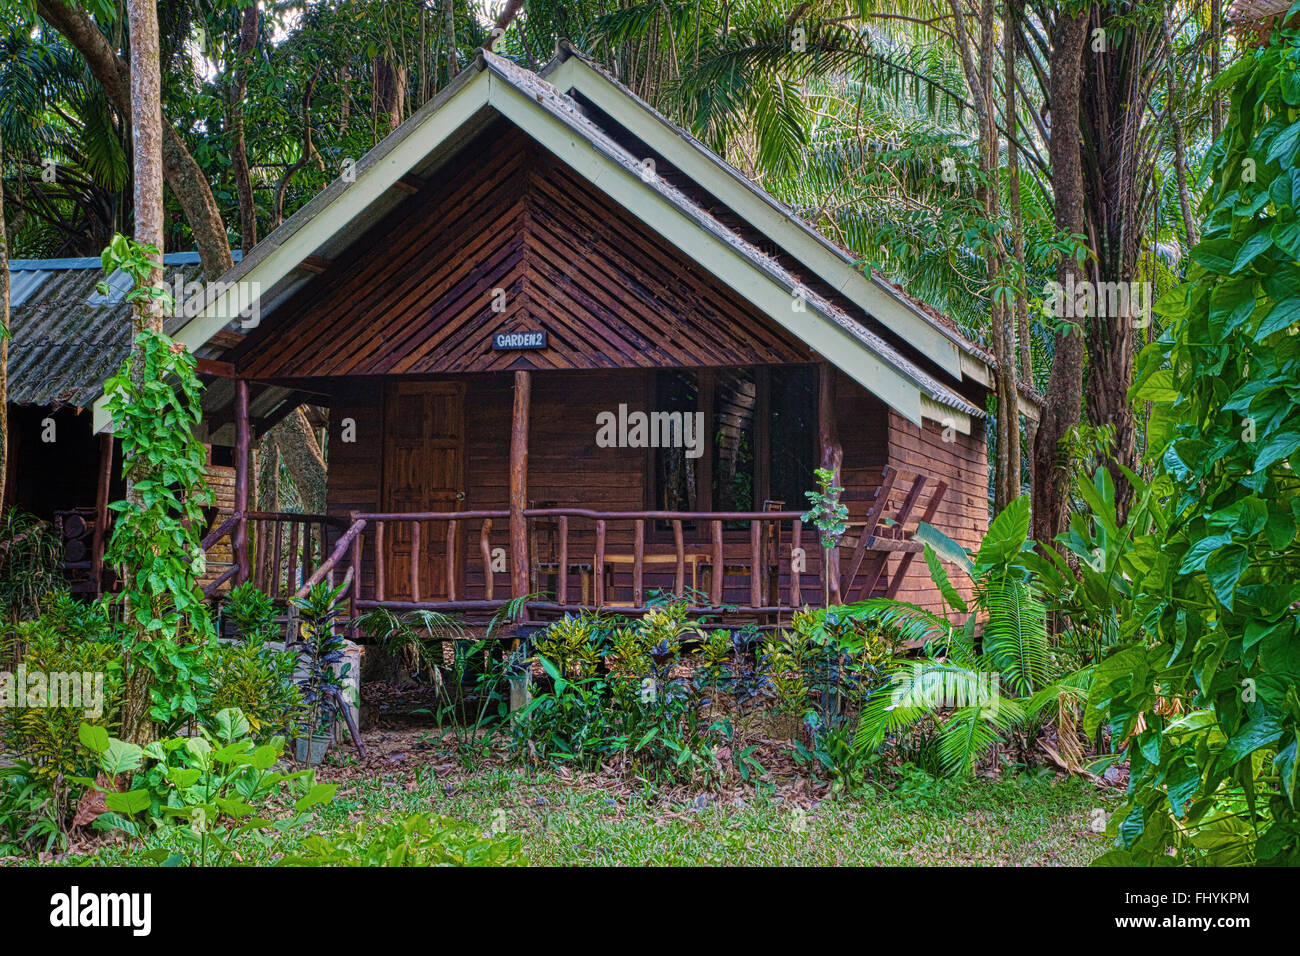 The RIVERSIDE COTTAGES in KHO SOK are a perfect place to stay to visit Kho Sok National Park - THAILAND Stock Photo